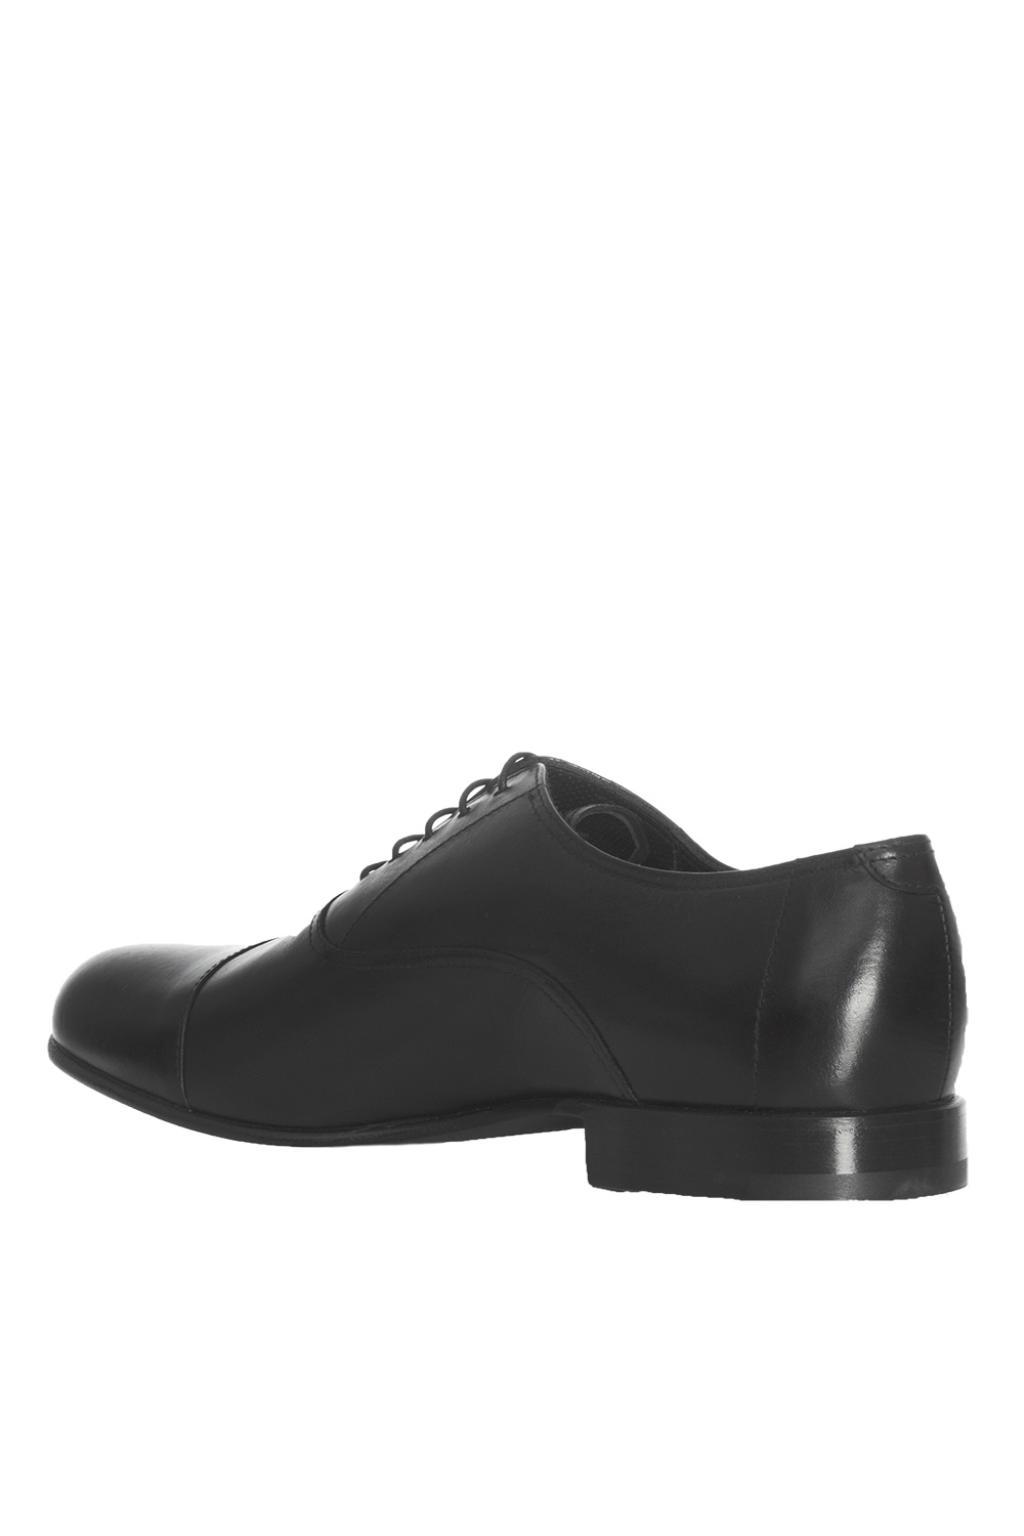 Giorgio Armani Leather Derby Shoes in Black for Men - Lyst